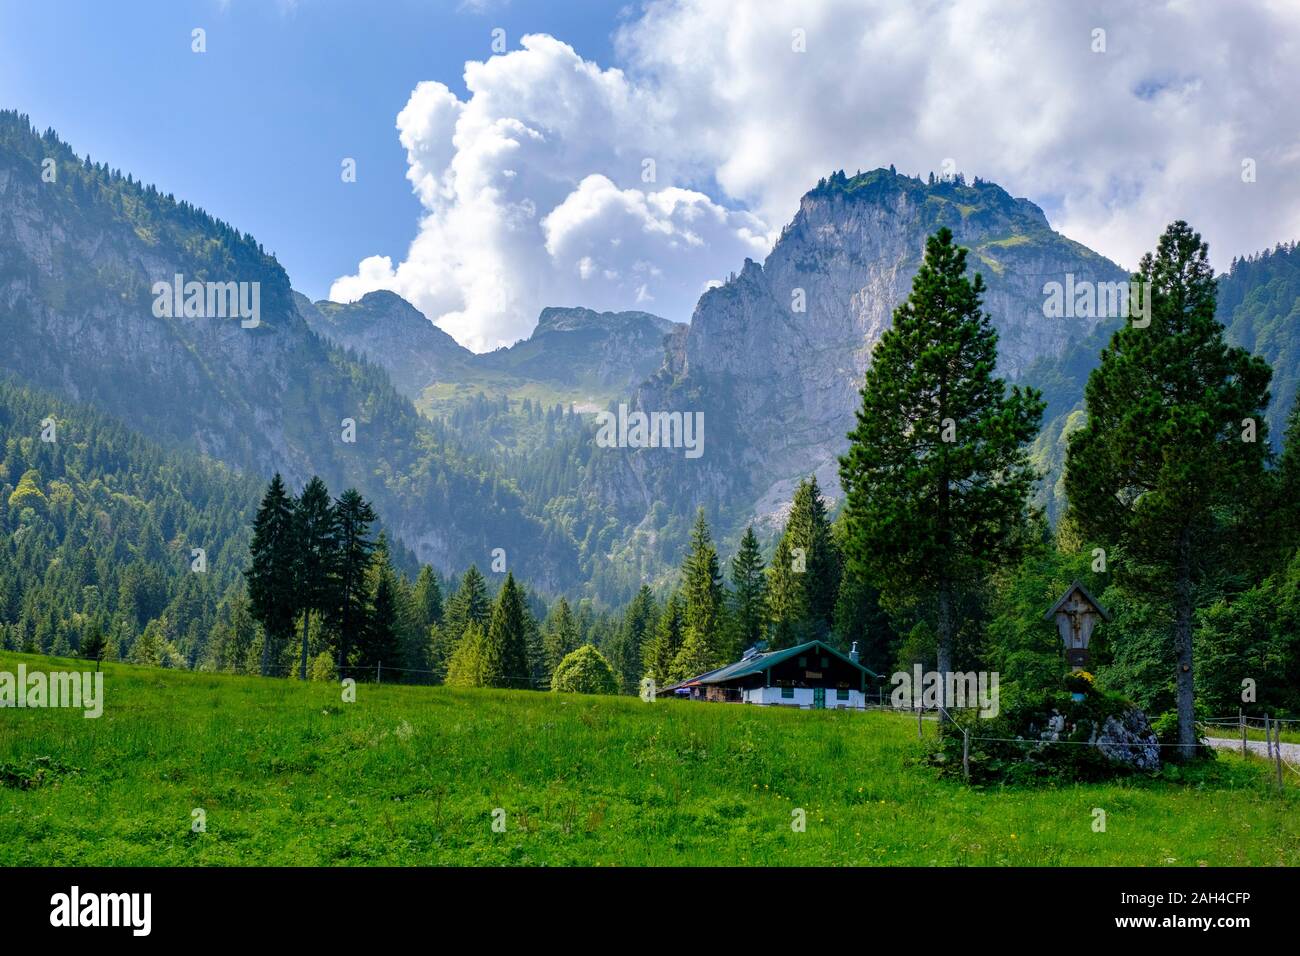 Germany, Bavaria, Arzbach, Scenic view of secluded Hintere Langentalalm cafe with Benediktenwand ridge in background Stock Photo